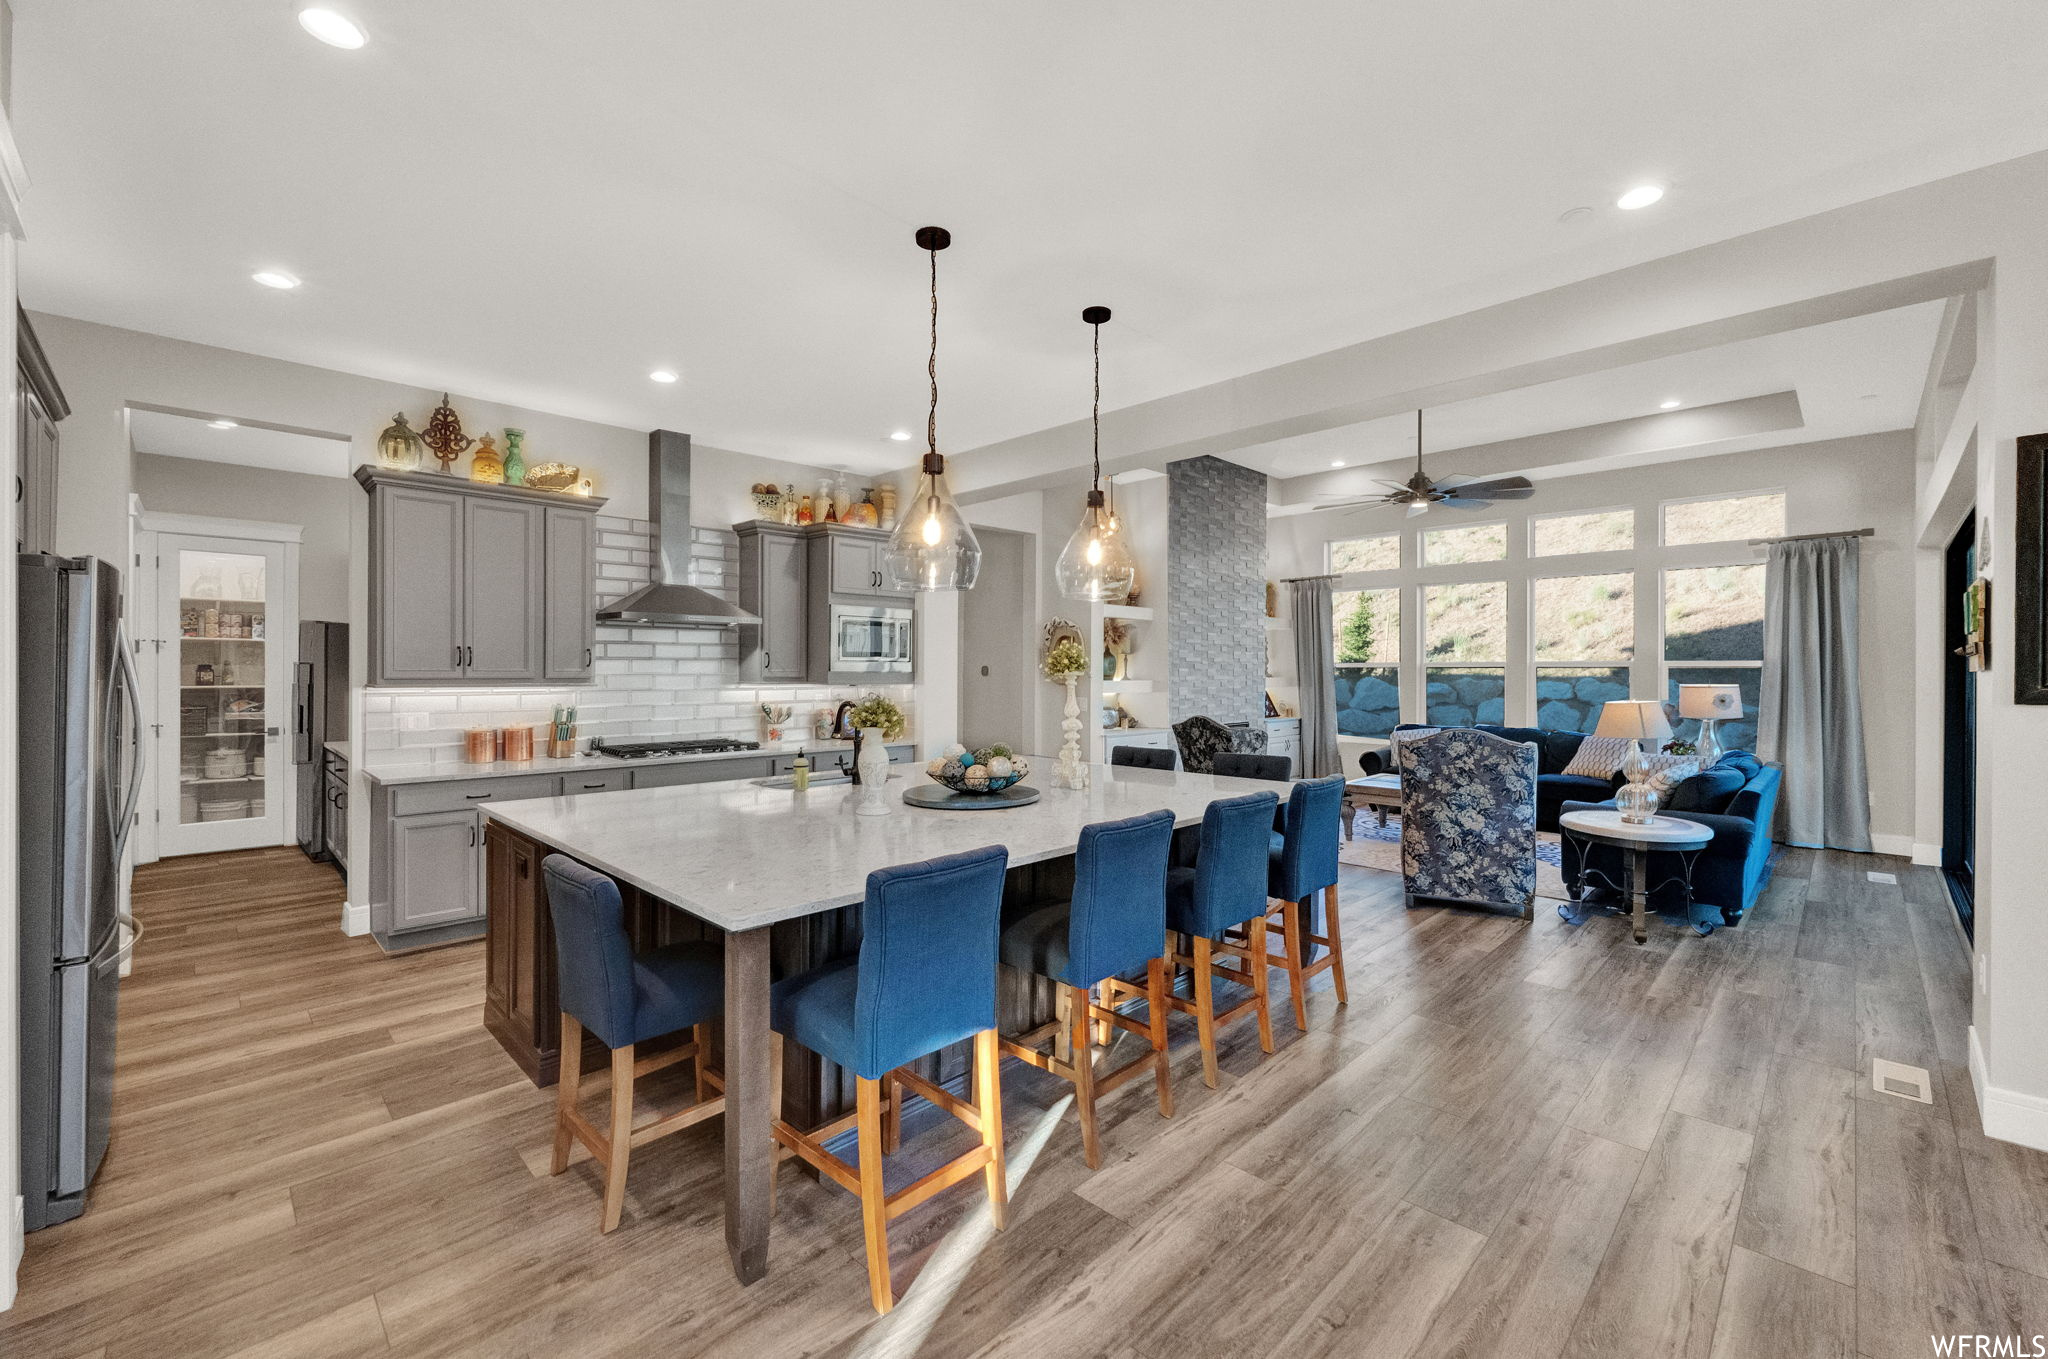 Kitchen with light hardwood flooring, decorative light fixtures, backsplash, ceiling fan, a center island, appliances with stainless steel finishes, a tray ceiling, kitchen island with sink, and wall chimney exhaust hood